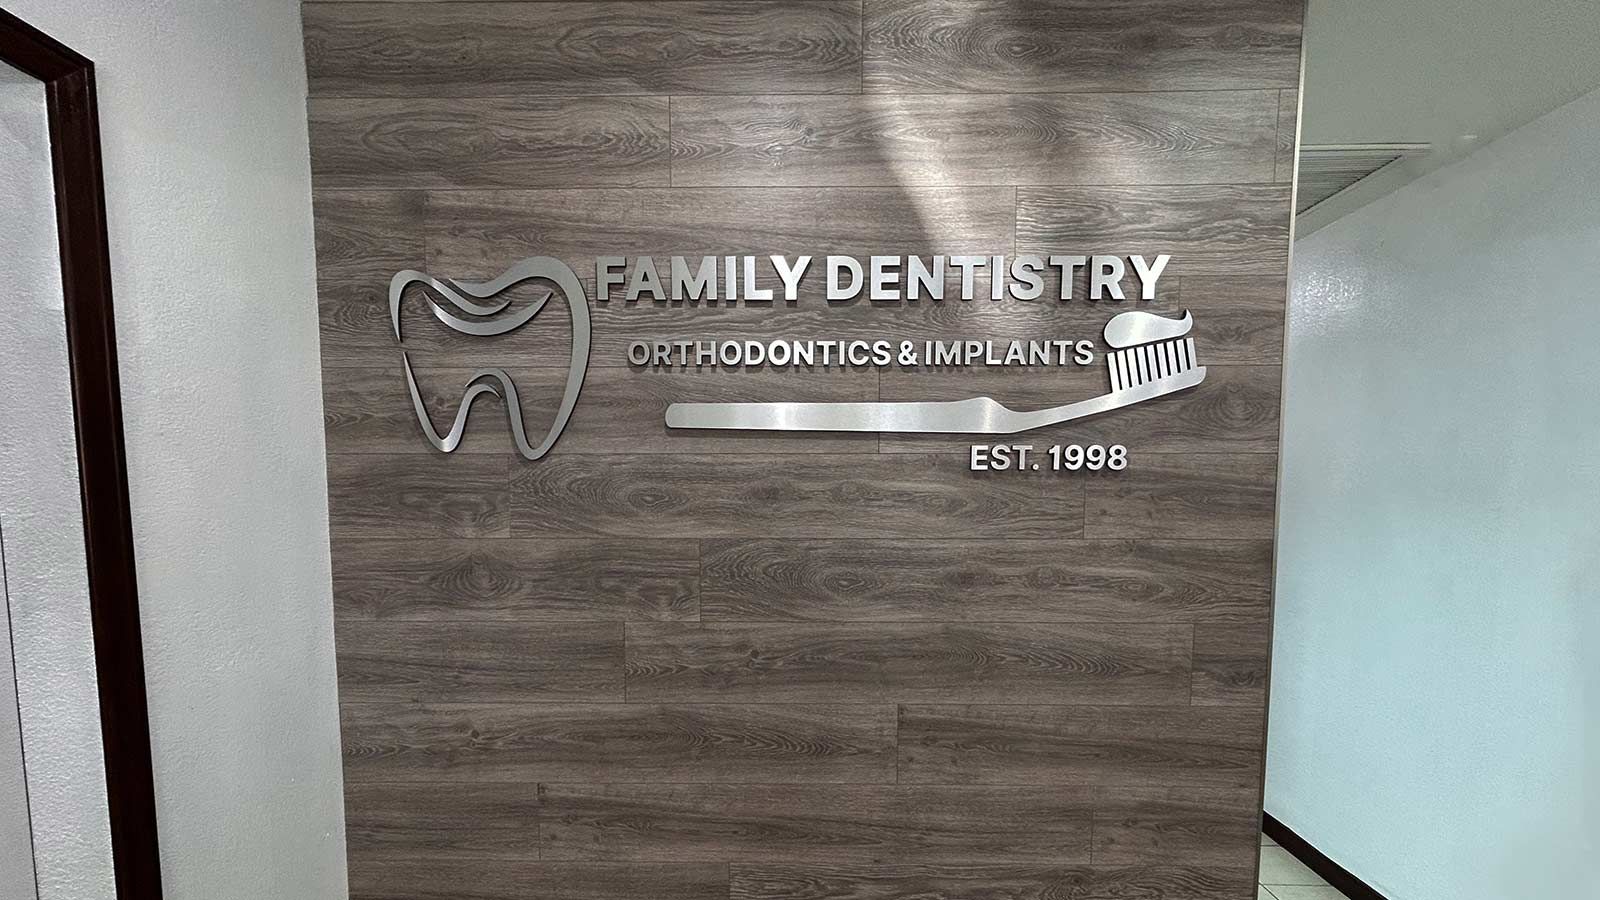 Family Dentistry medical office sign decorating the wall